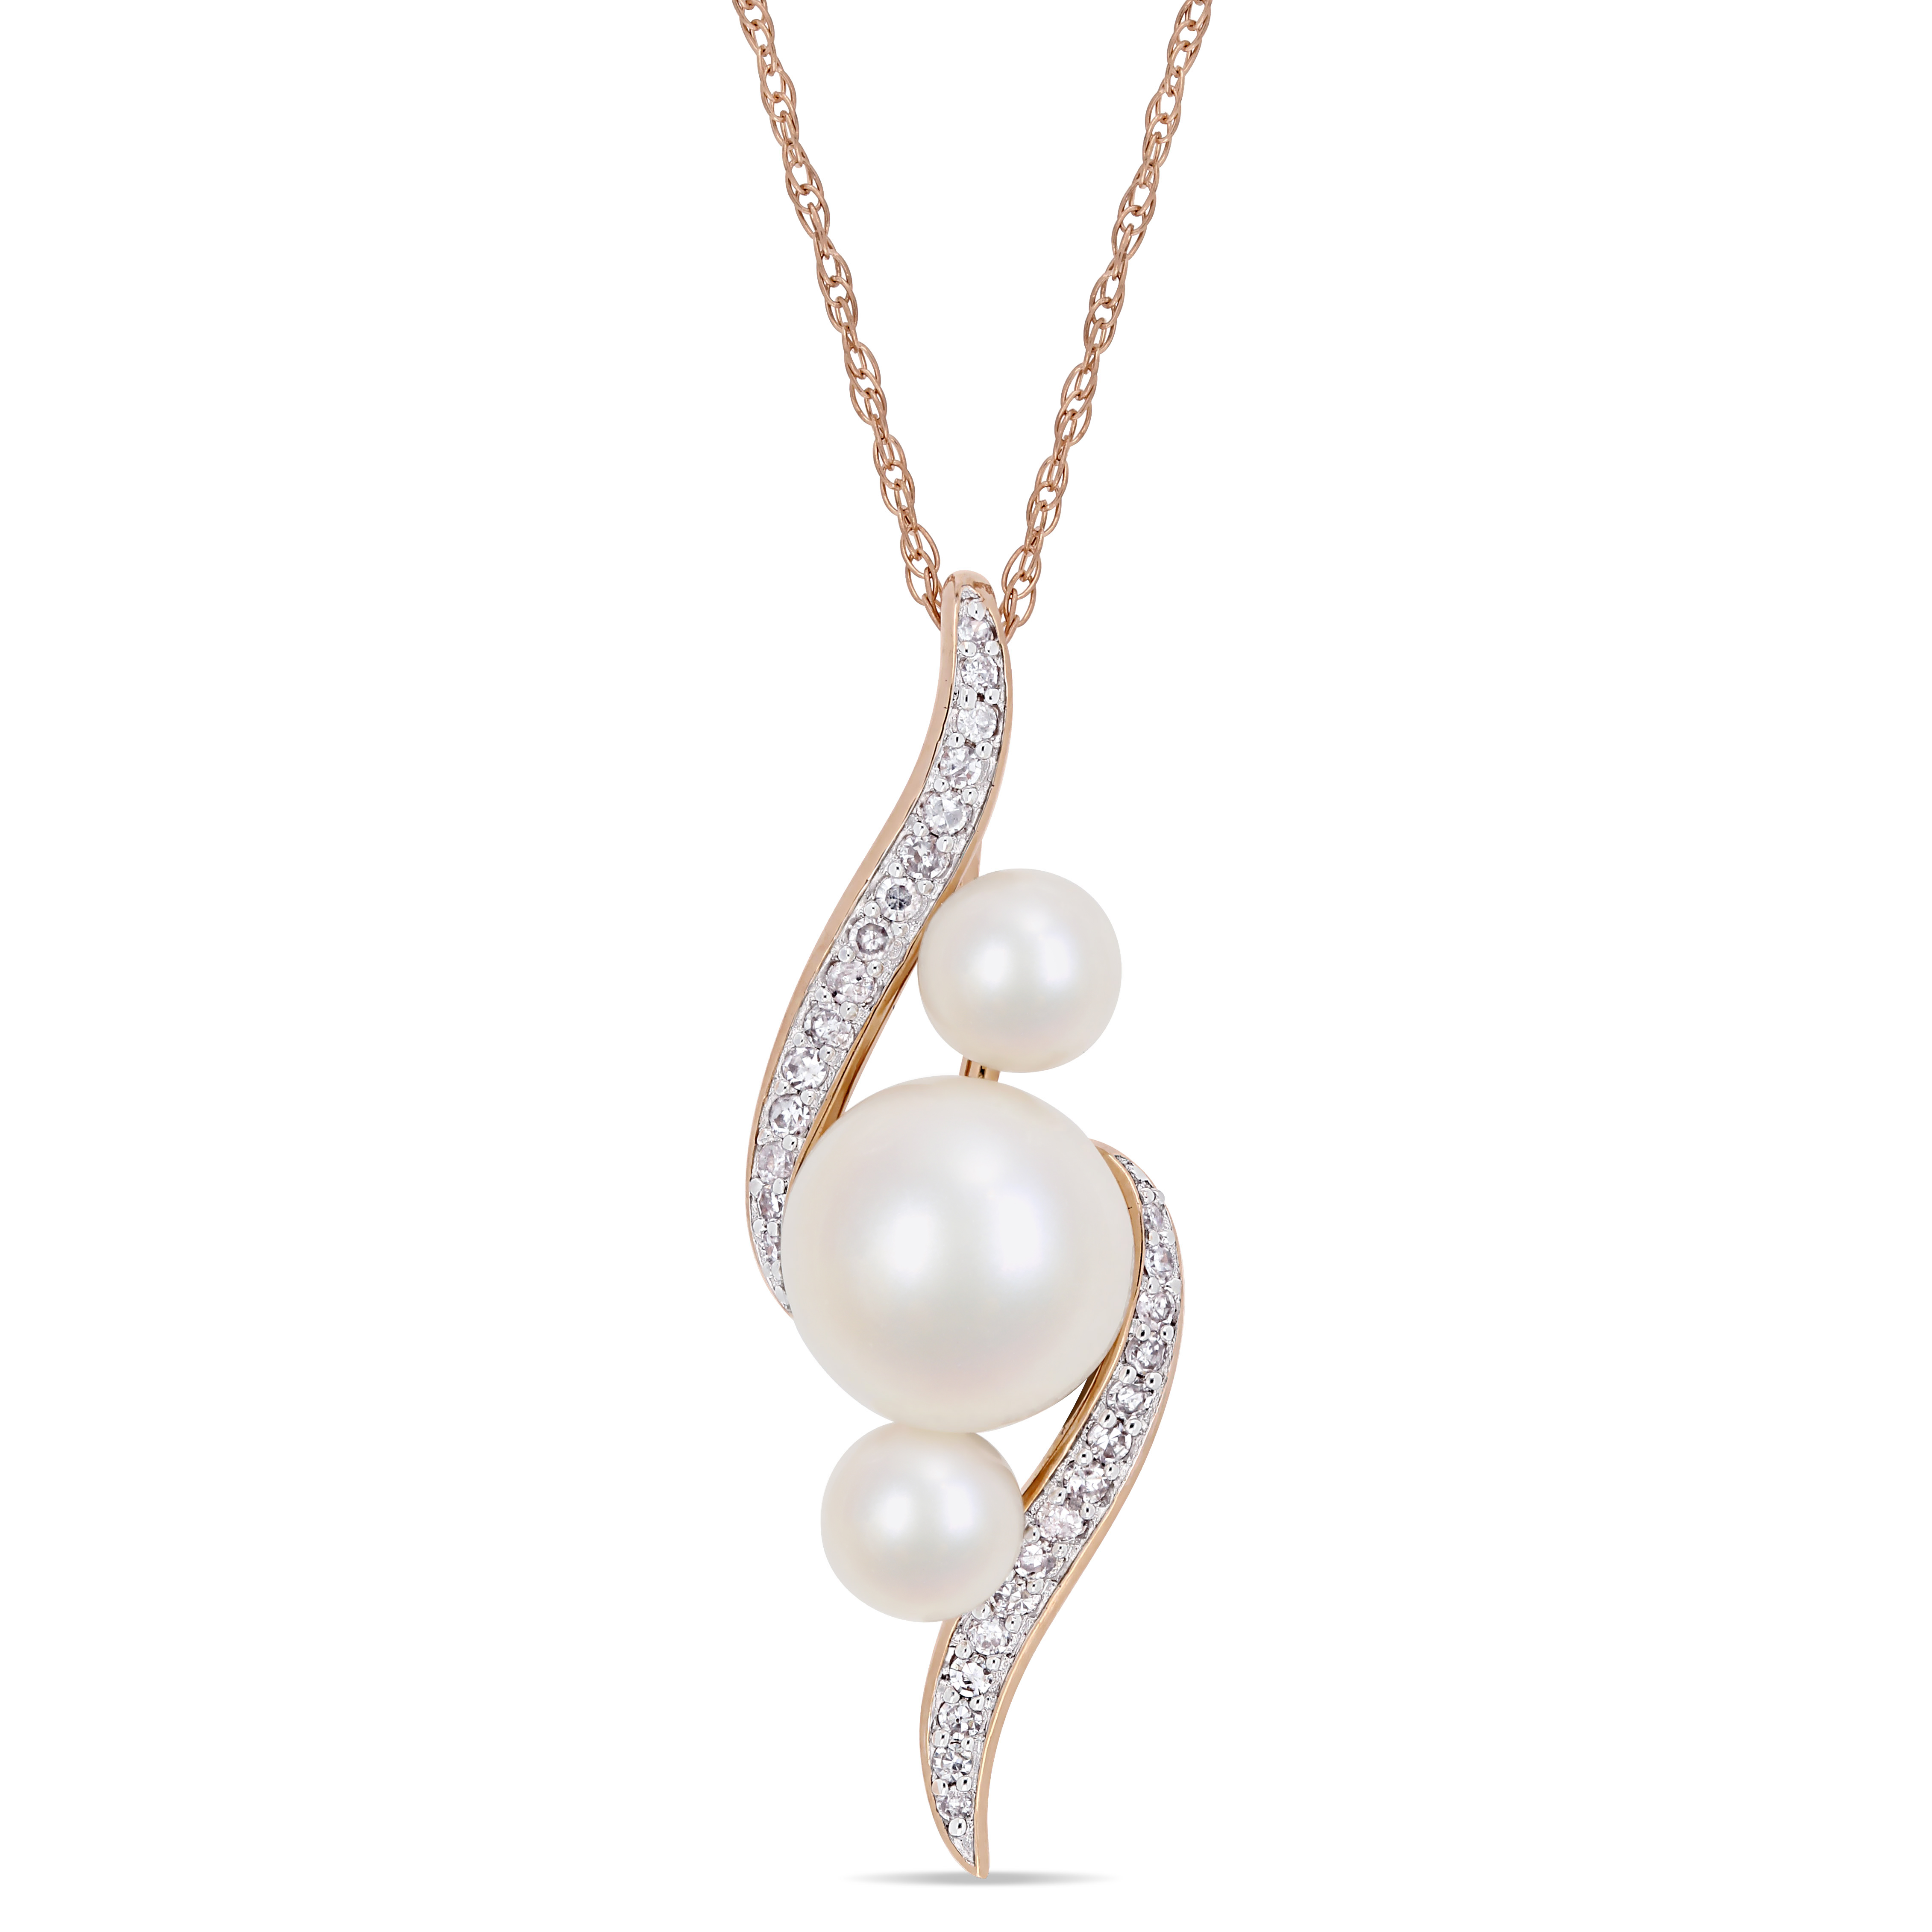 8-8.5 MM Cultured Freshwater Pearl and 1/8 CT TW Diamond Drop Swirl Necklace in 10k Rose Gold